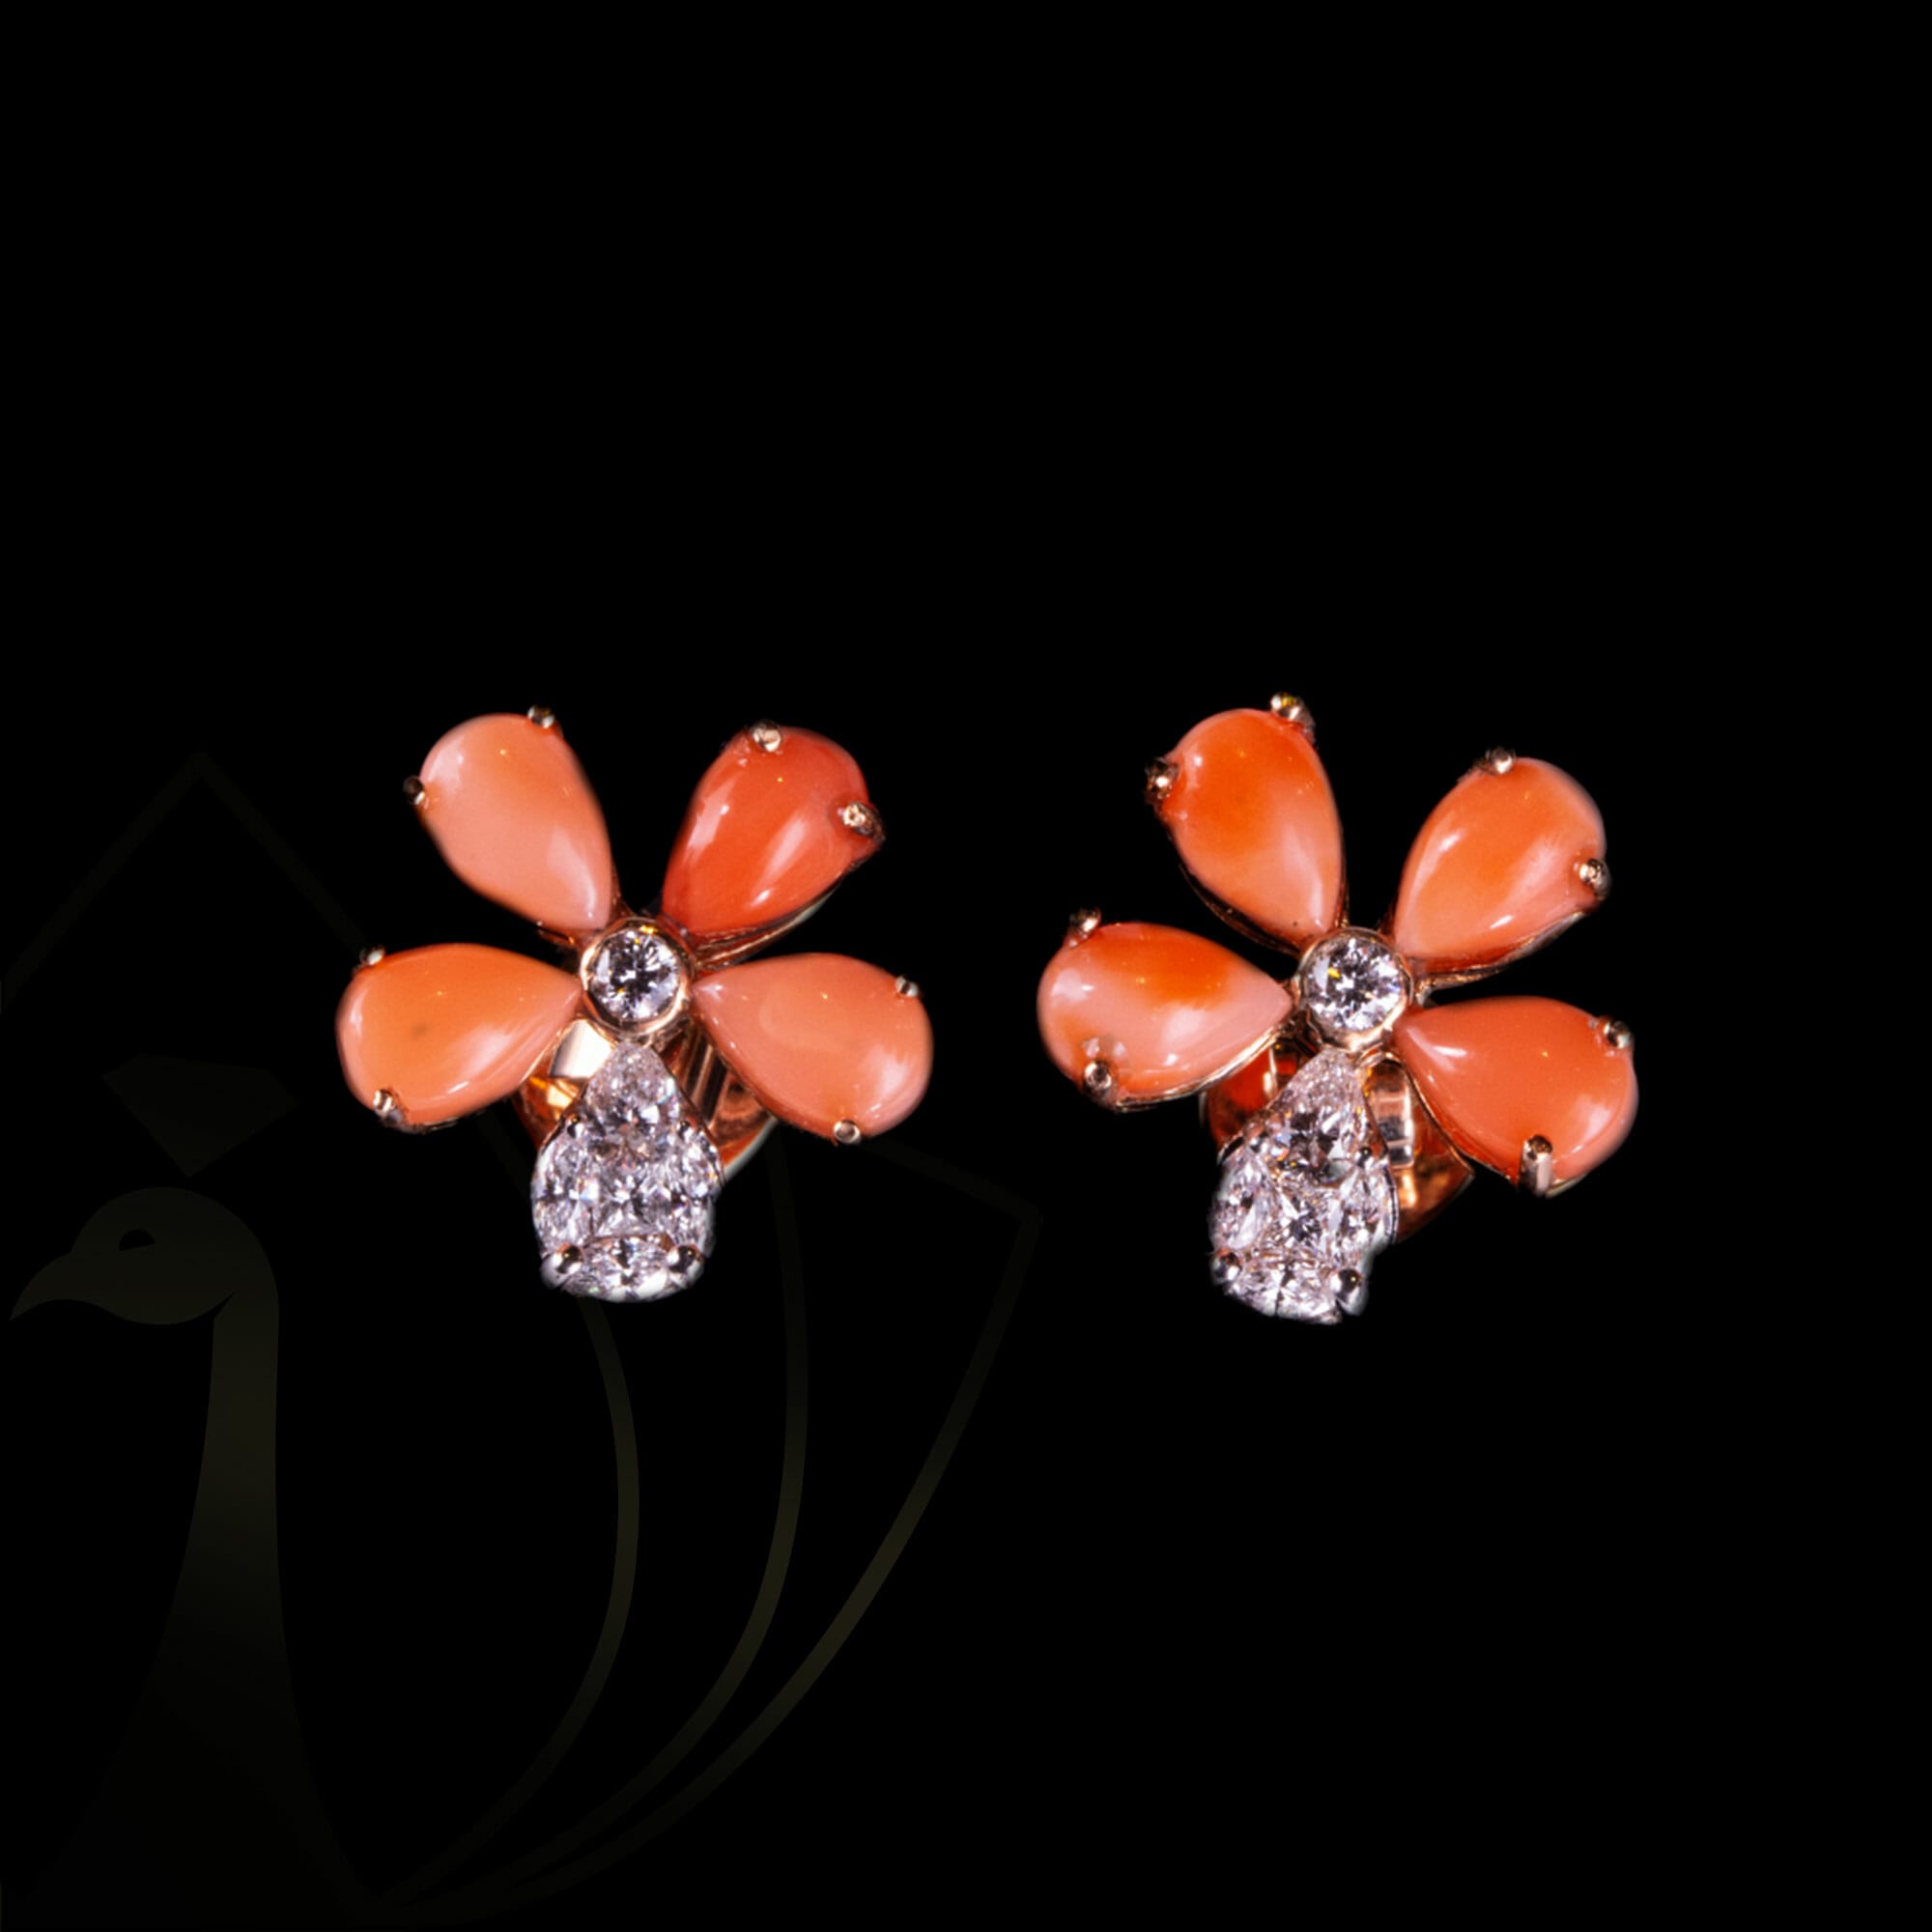 Charming Charisma Diamond Earrings from our exclusive Gulz Collection